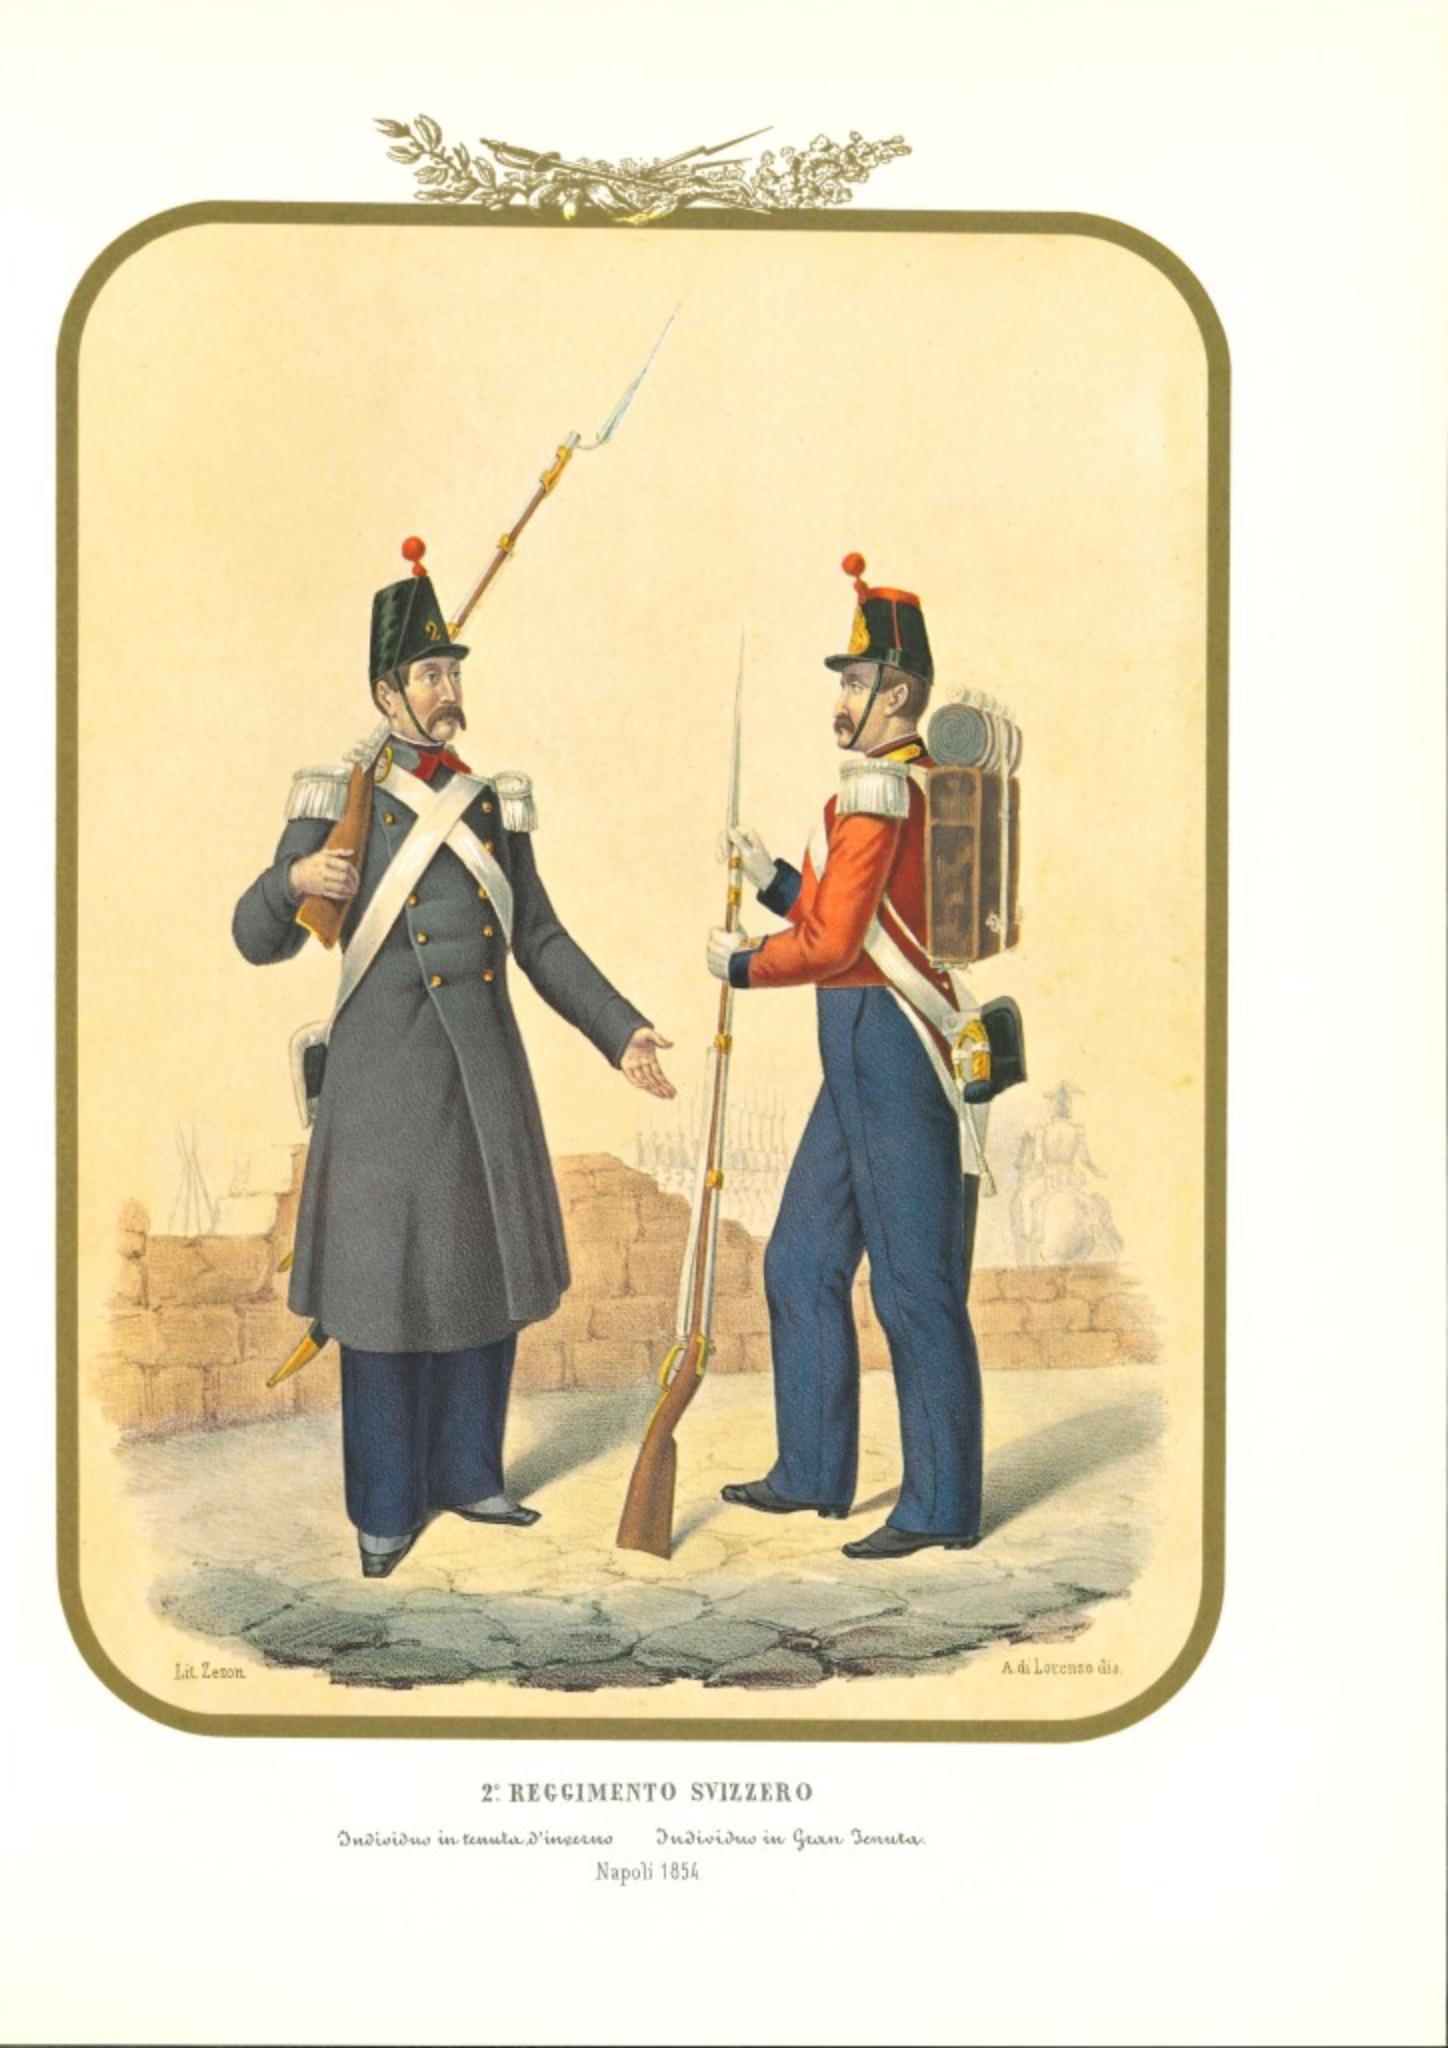 II Swiss Regiment is a lithograph by Antonio Zezon. Naples 1854.

Interesting colored lithograph which describes some members of the Swiss Regiment: Individual in winter outfit - Individual in uniform dress.

In excellent condition, this print